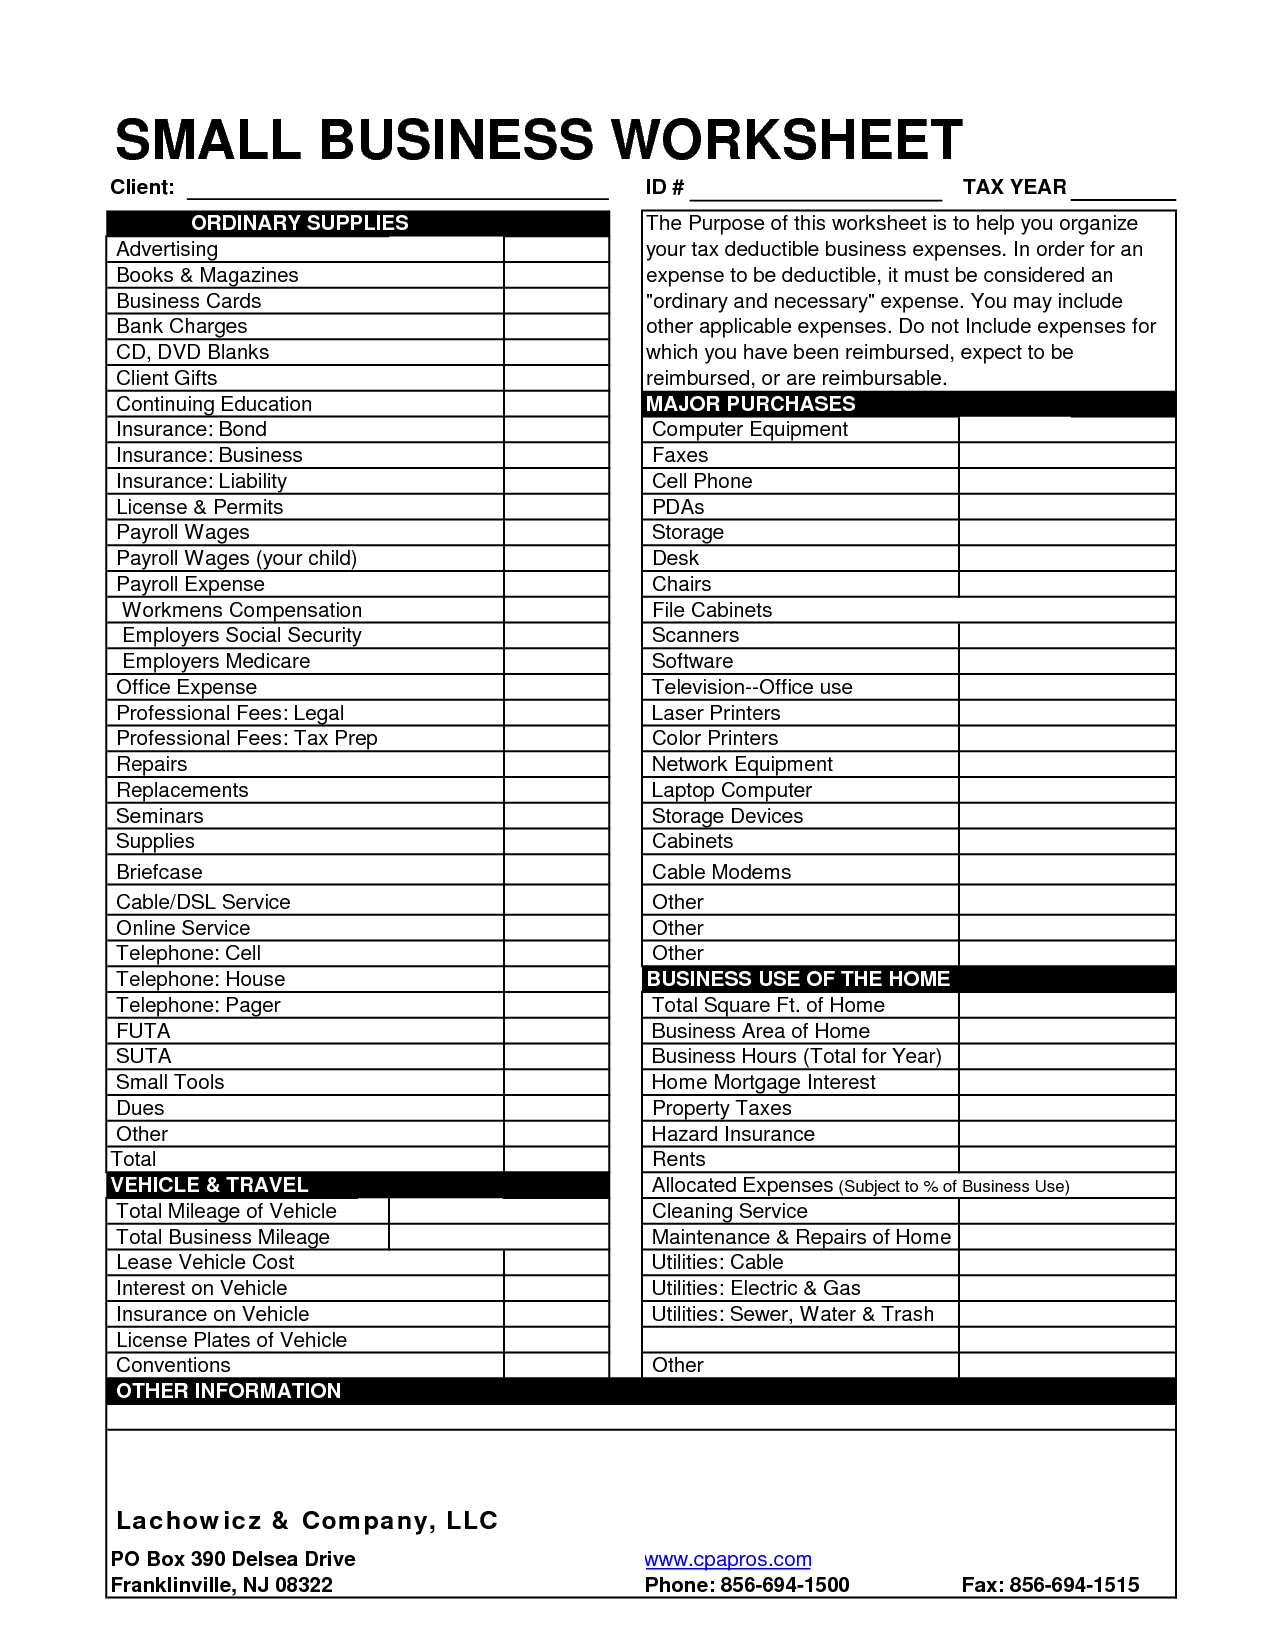 8-best-images-of-tax-preparation-organizer-worksheet-individual-income-tax-organizer-business